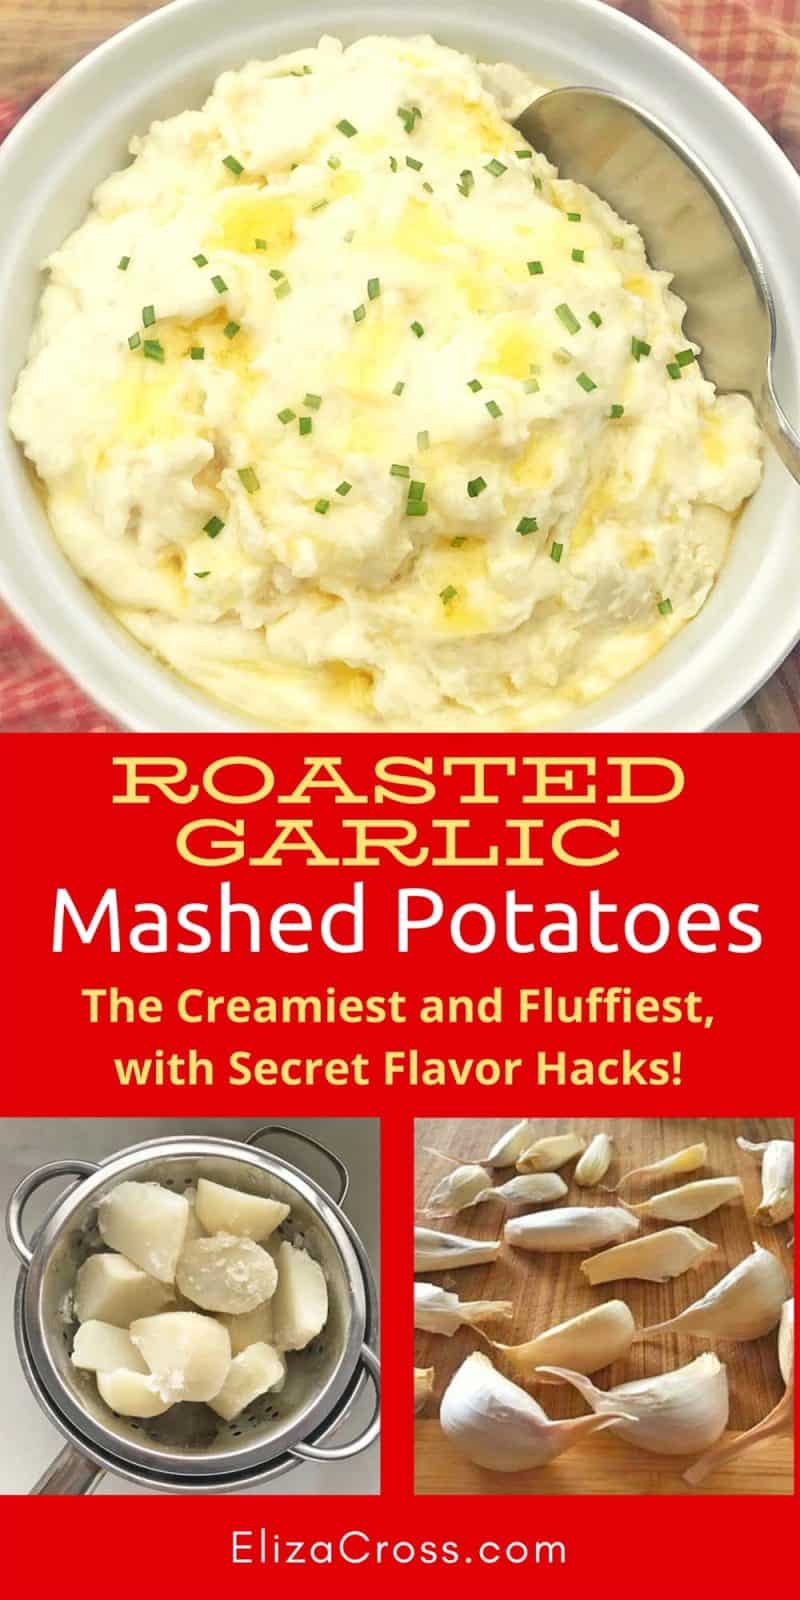 A white dish of roasted garlic mashed potatoes, a strainer with cooked potatoes, and several cloves of garlic